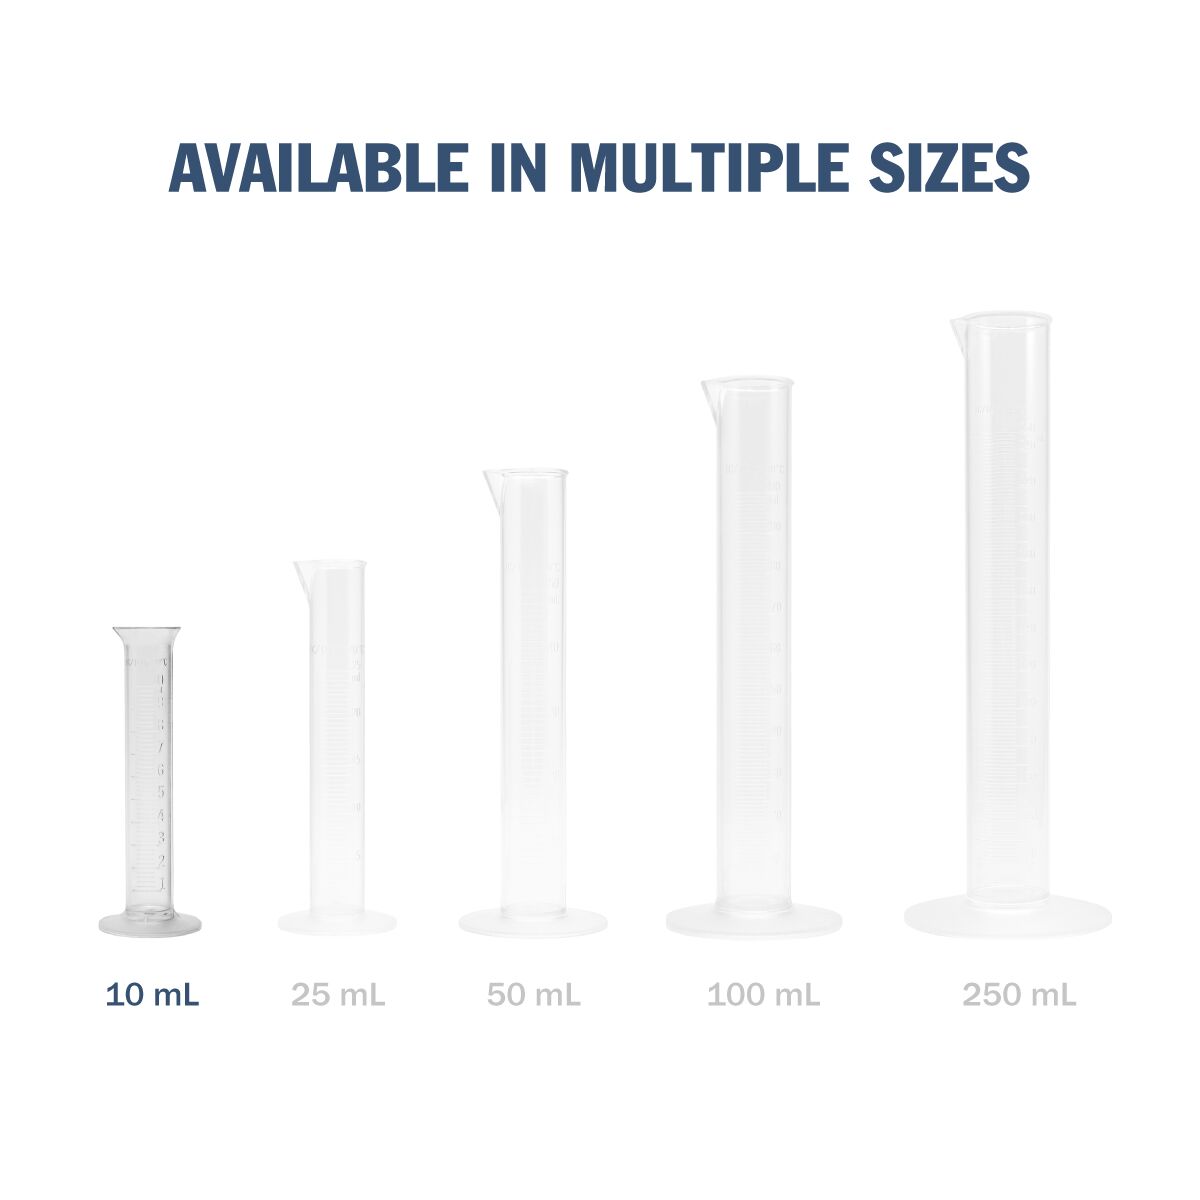 Transparent &amp; Autoclavable Graduated Cylinder available in multiple sizes - 10mL